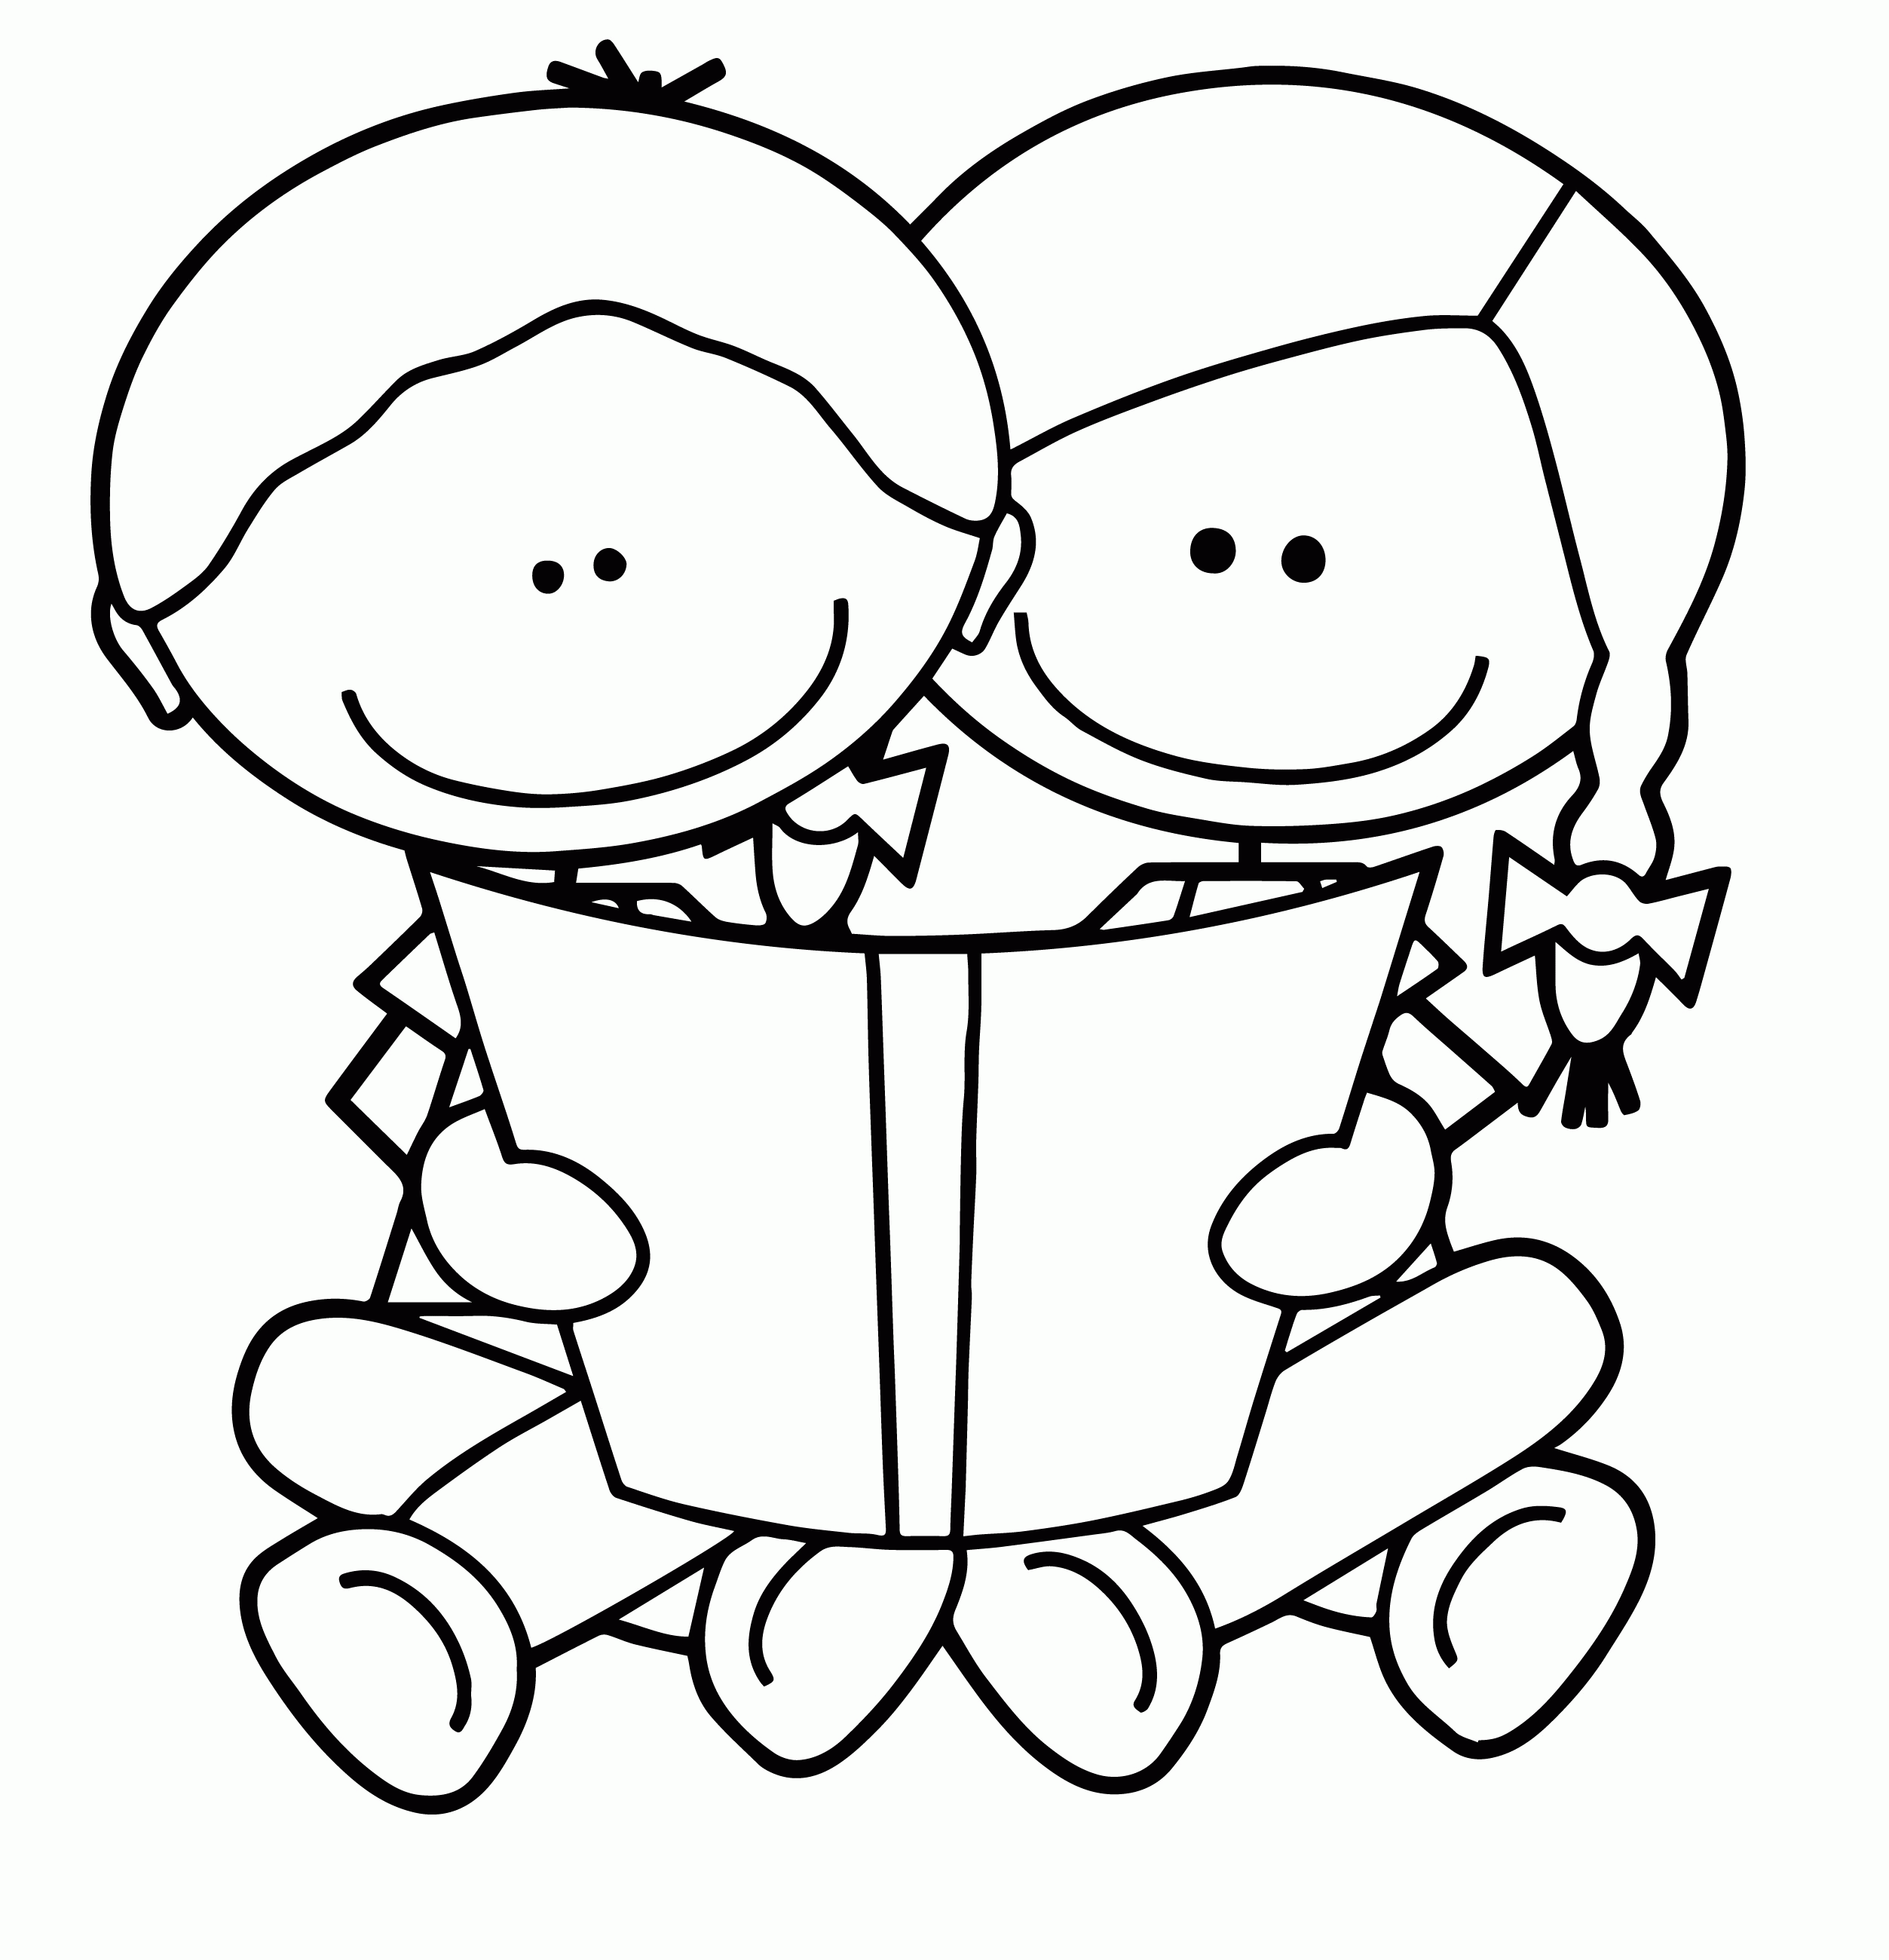 https://www.bestcoloringpagesforkids.com/wp-content/uploads/2018/06/Reading-Book-Coloring-Page.gif